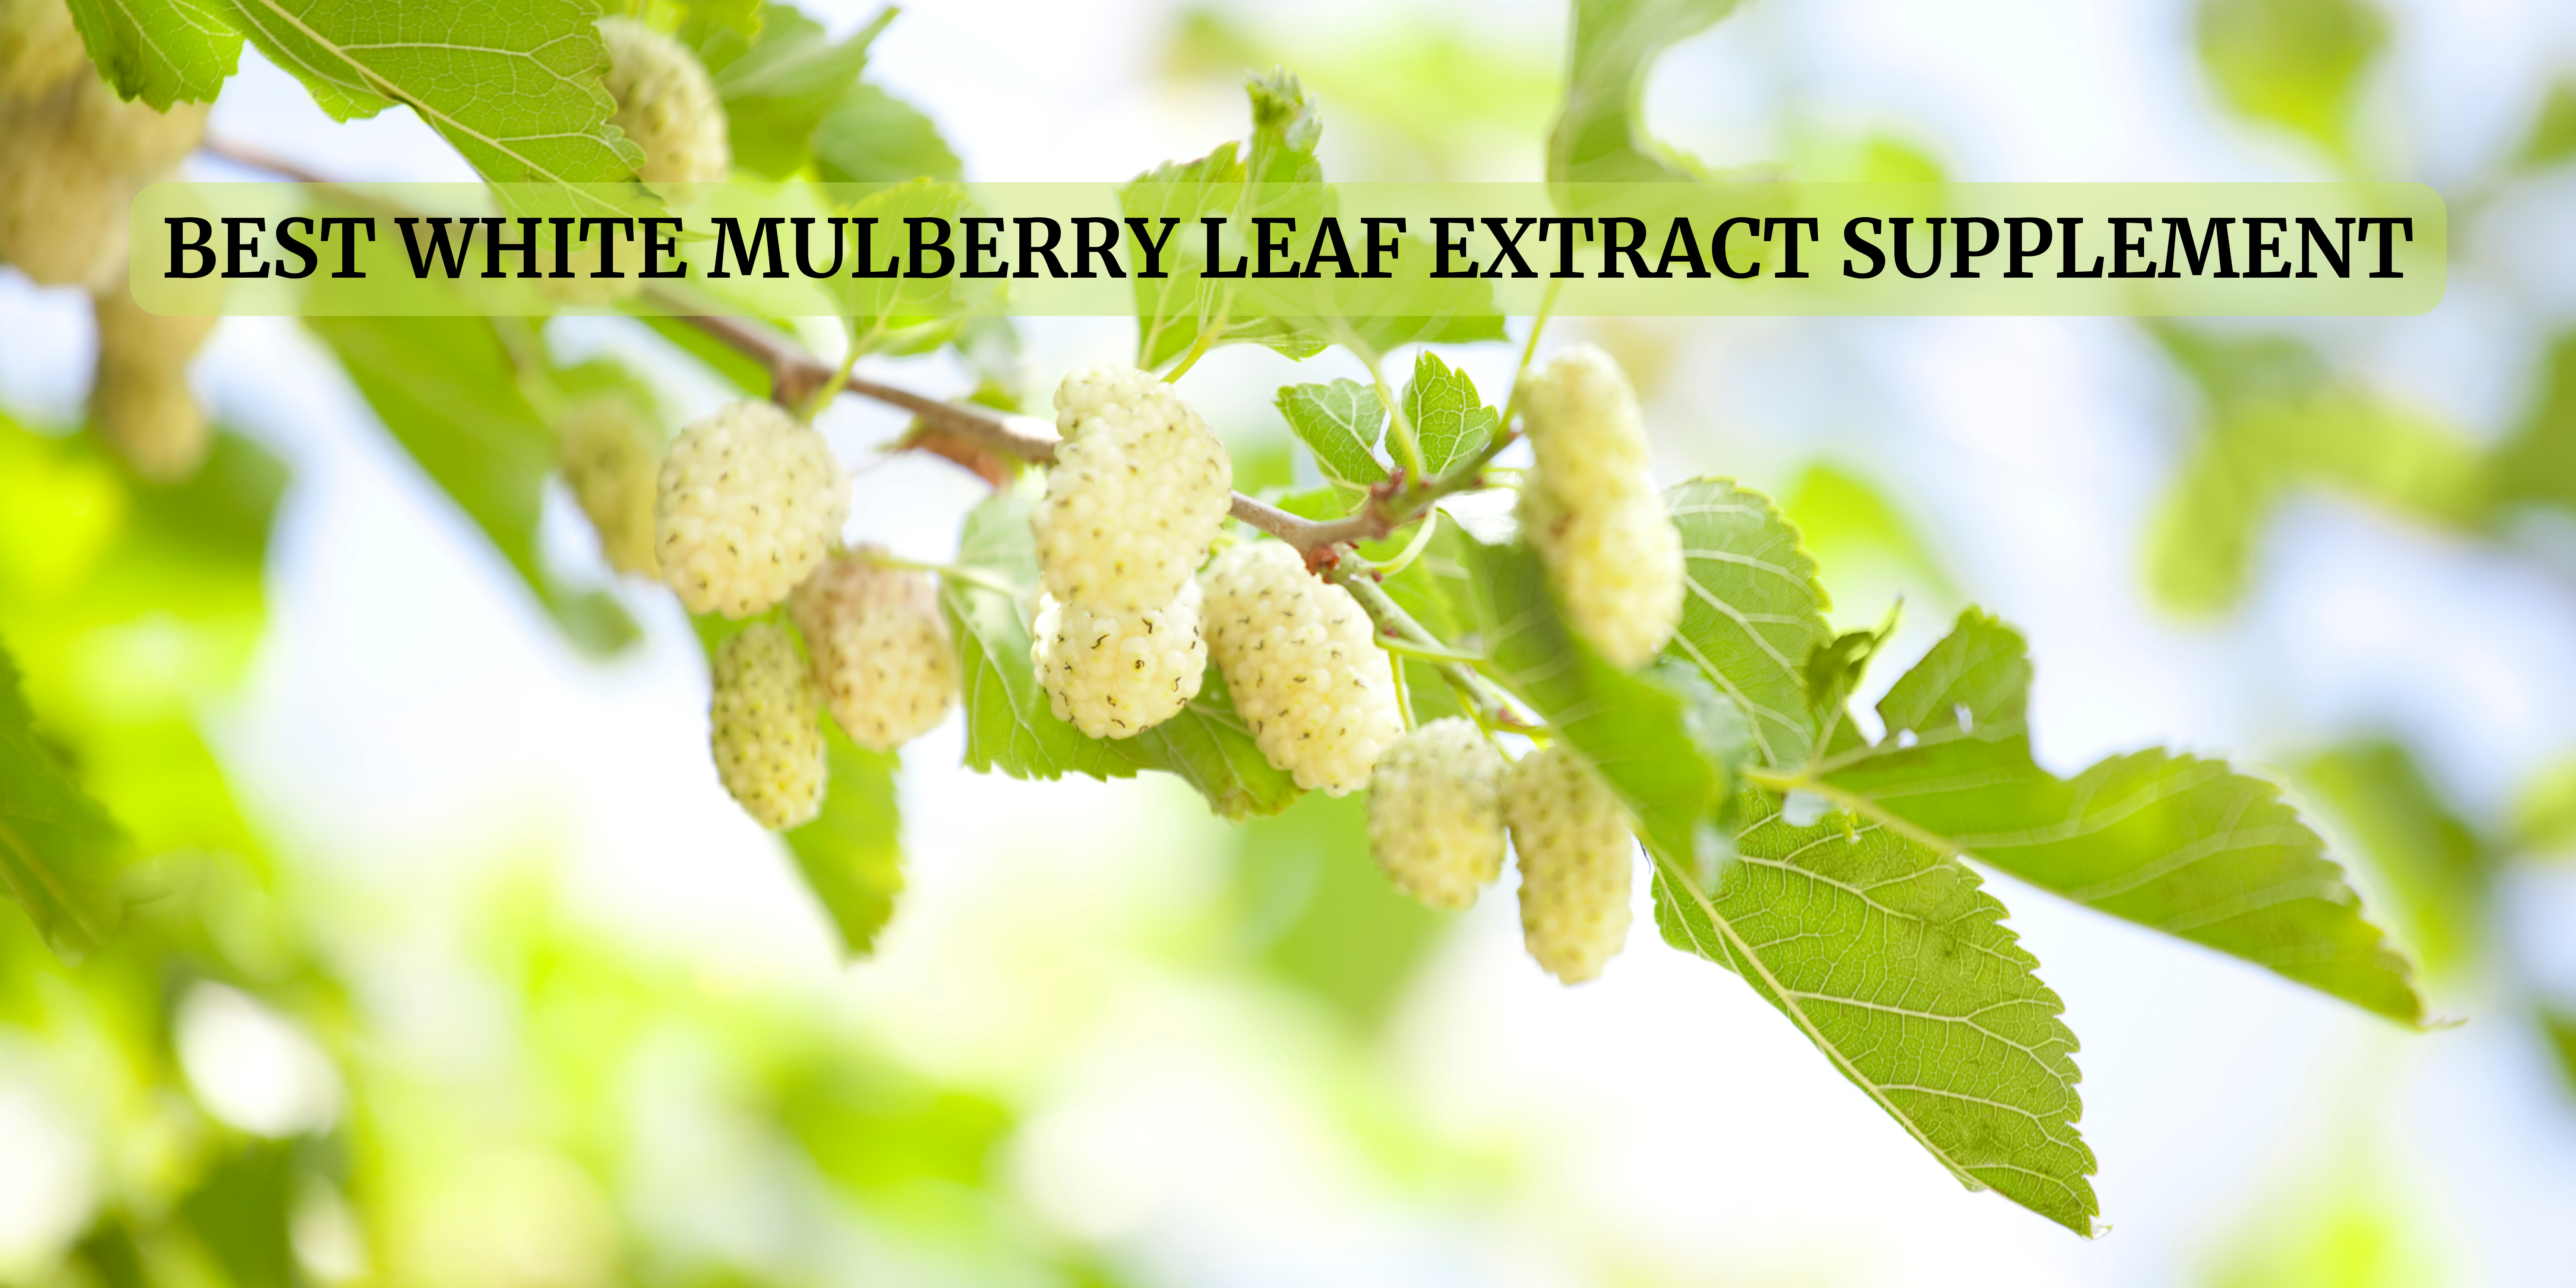 white mulberry leaf extract supplement in Japan